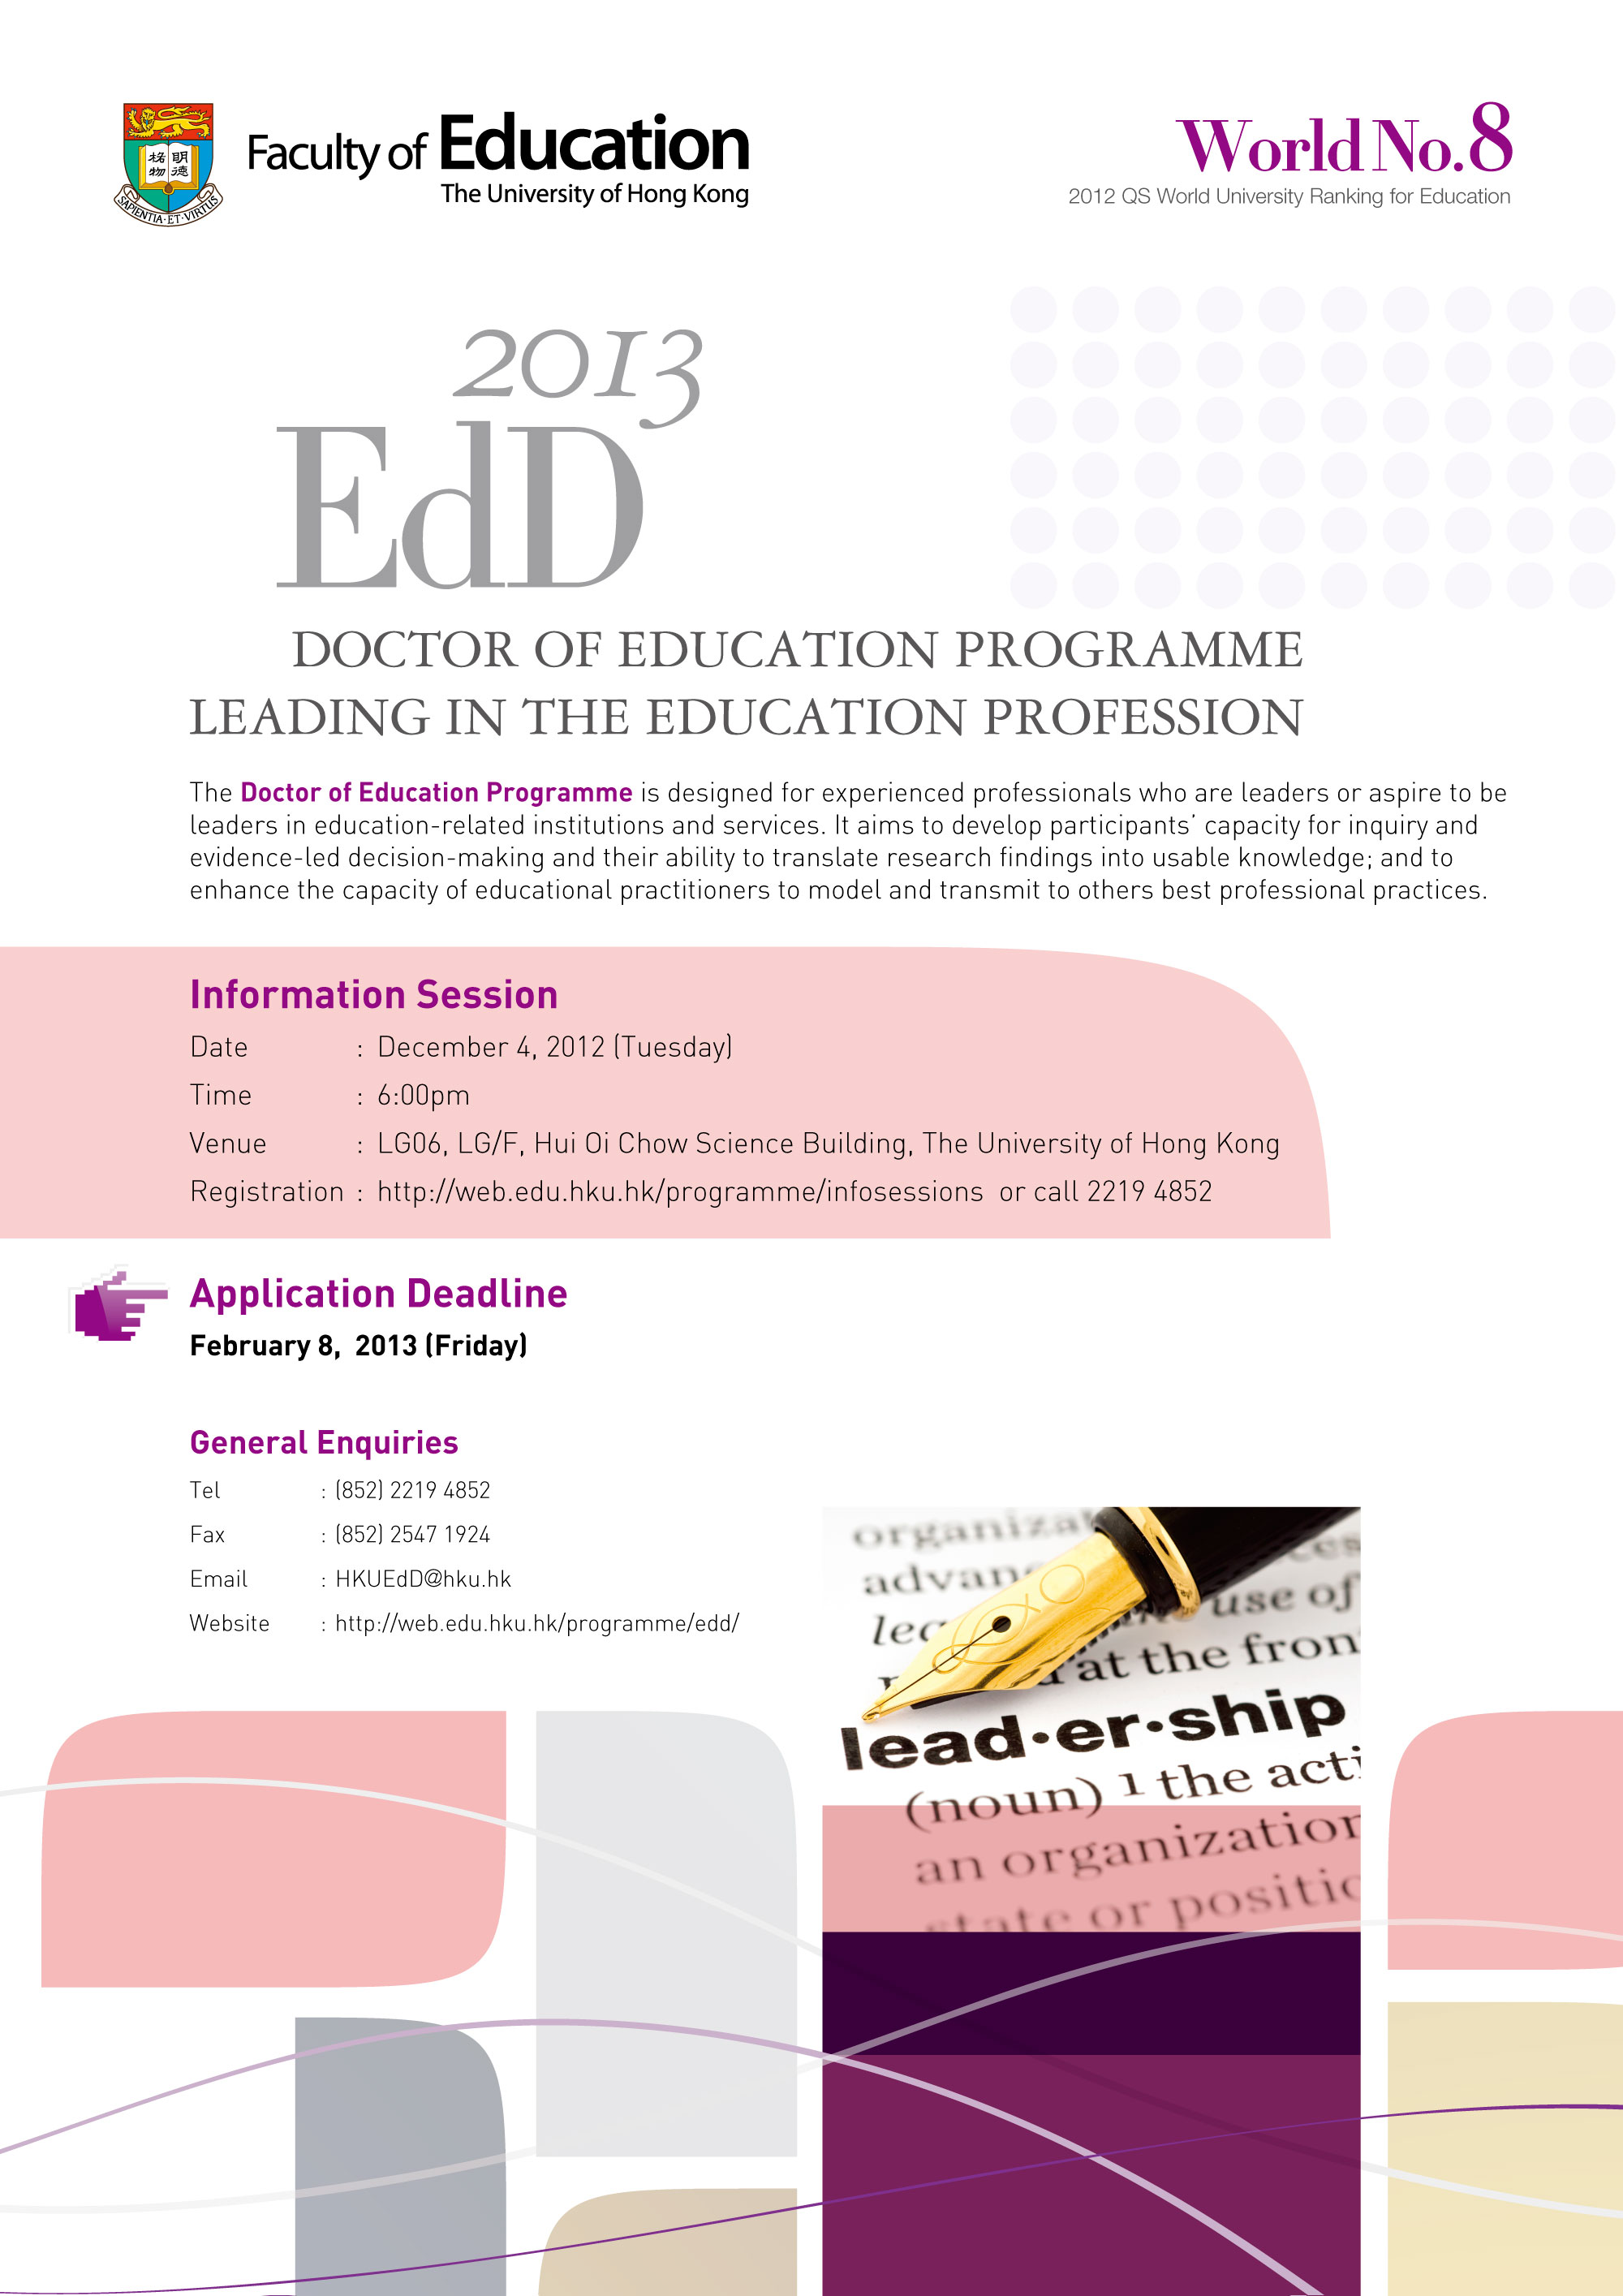 Information Session for Doctor of Education (EdD)